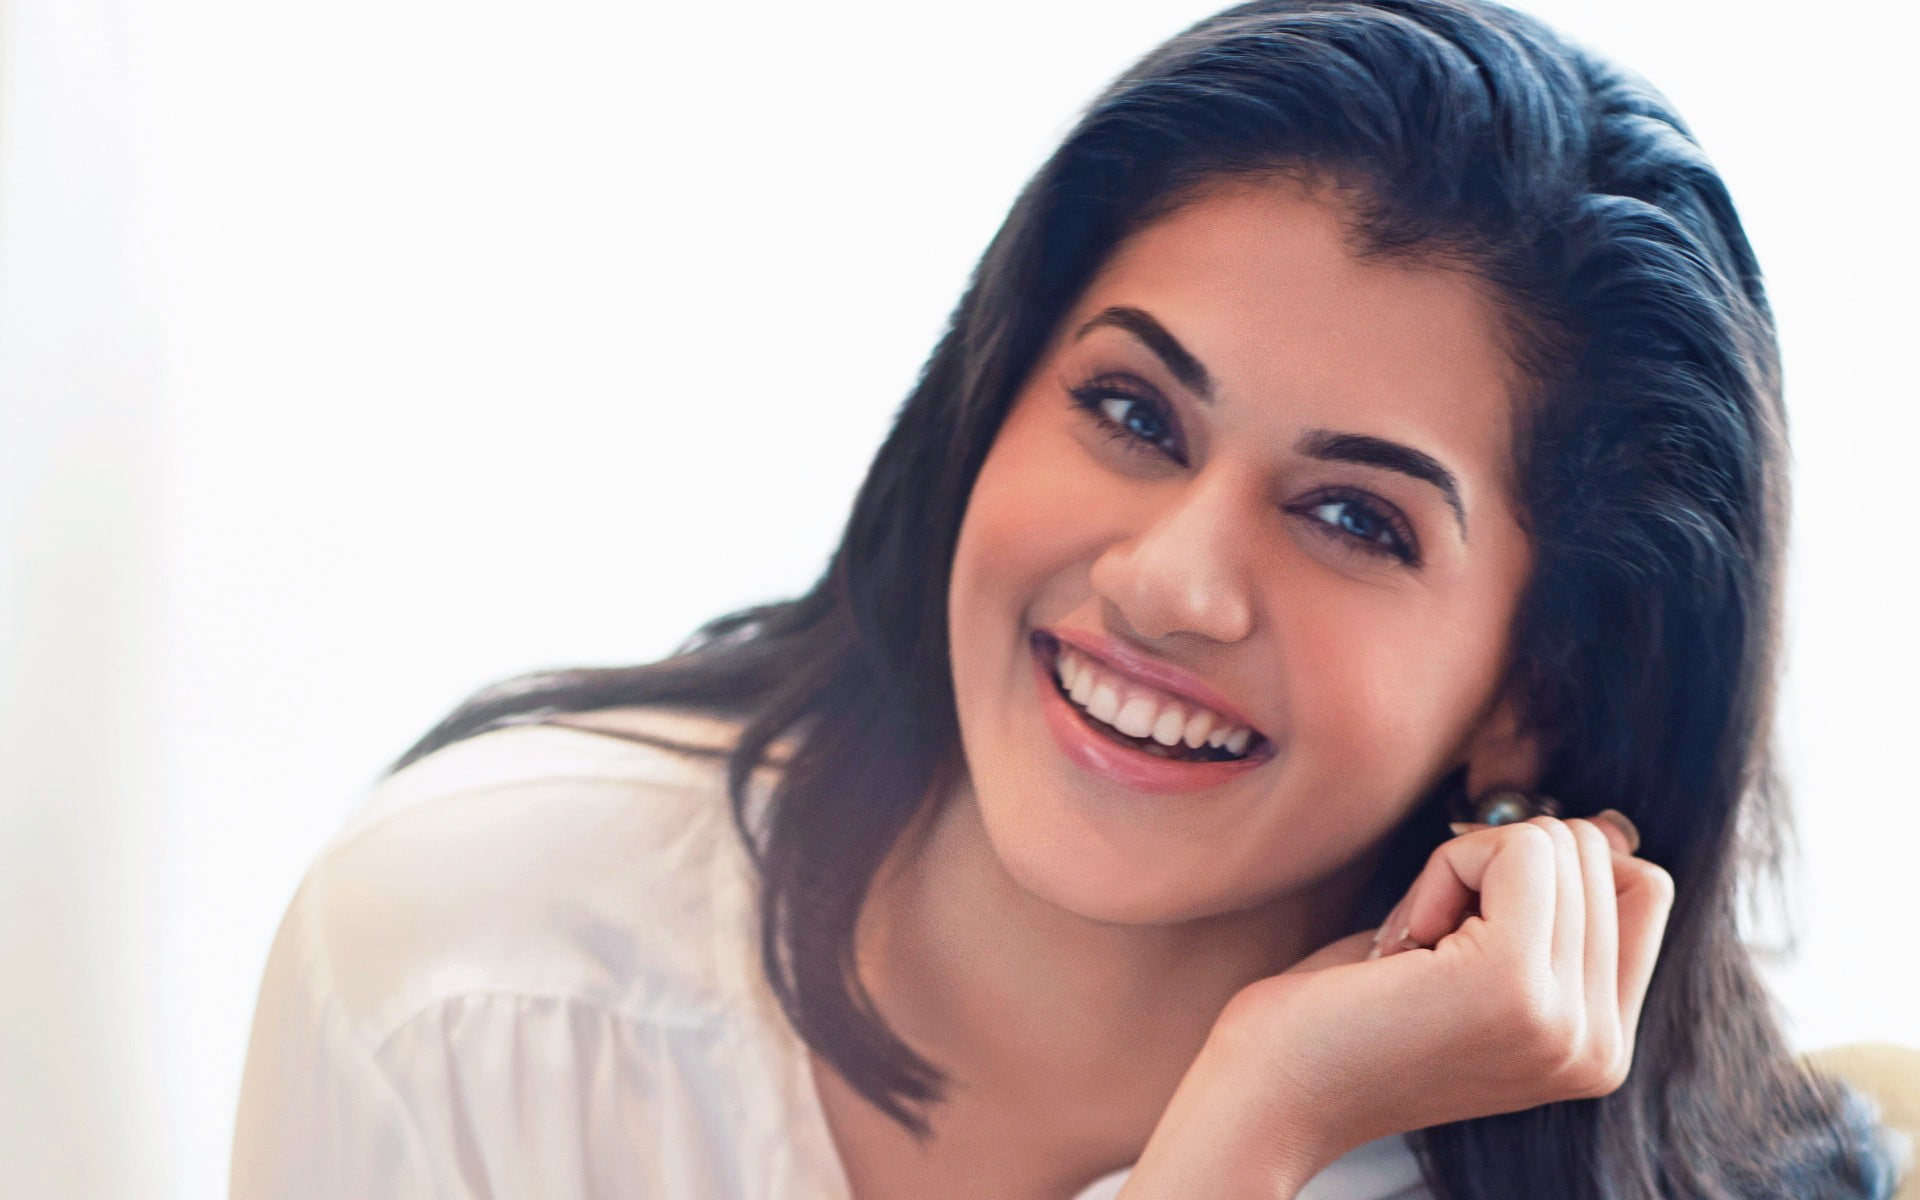 taapsee, indian celebrities, girls, desi girls, portrait, one person